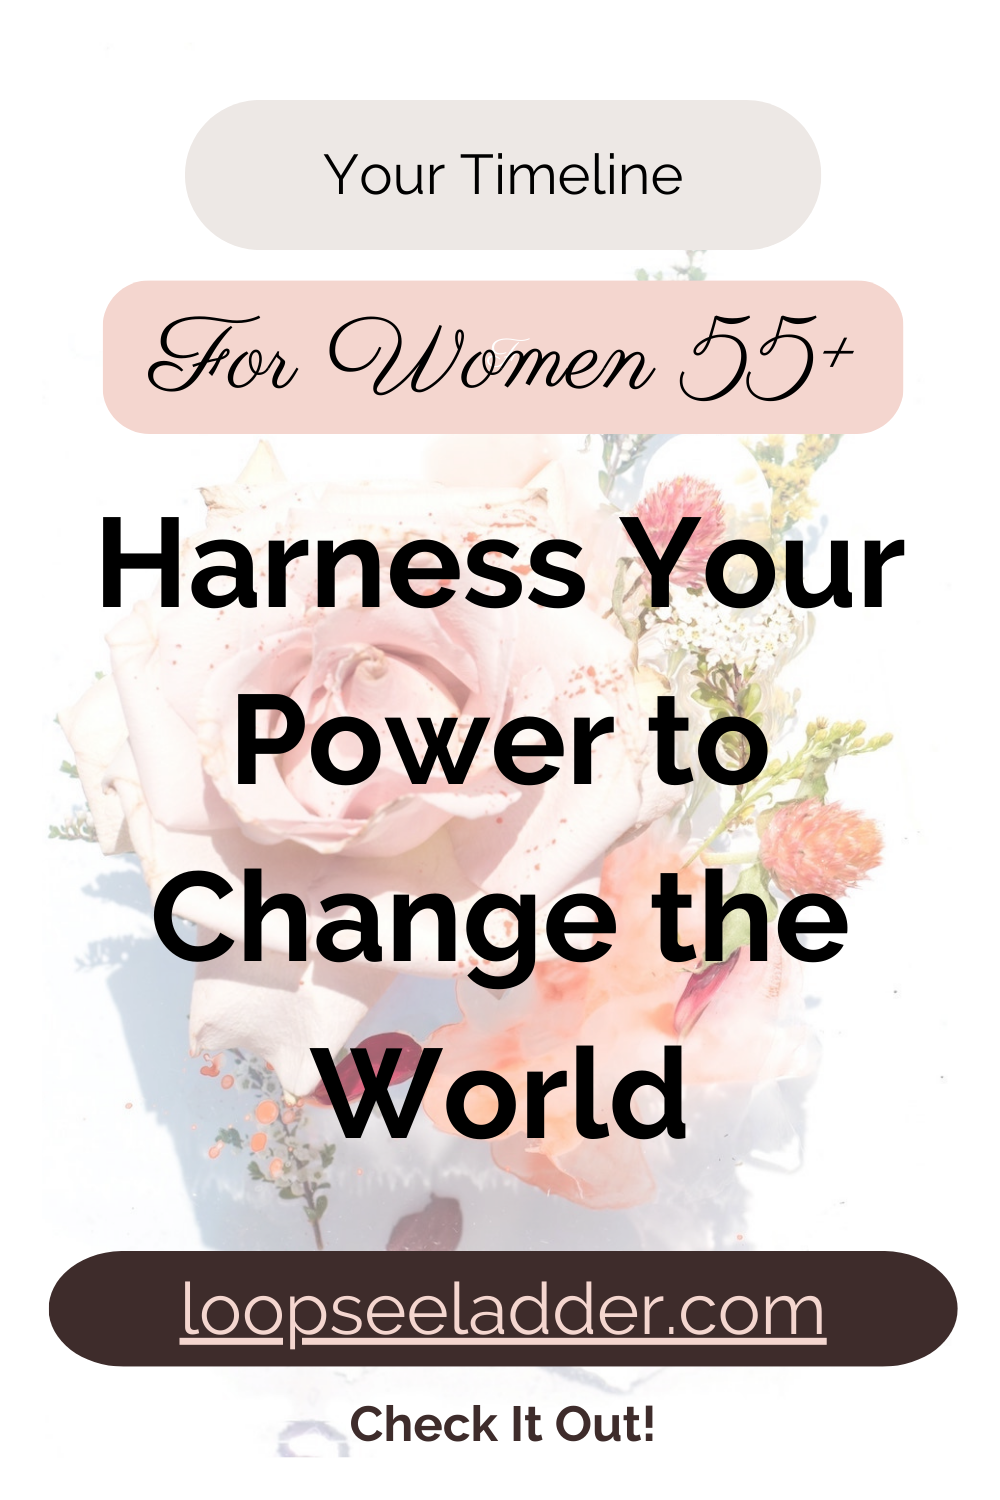 How Women 55+ Can Harness Their Power to Change the World